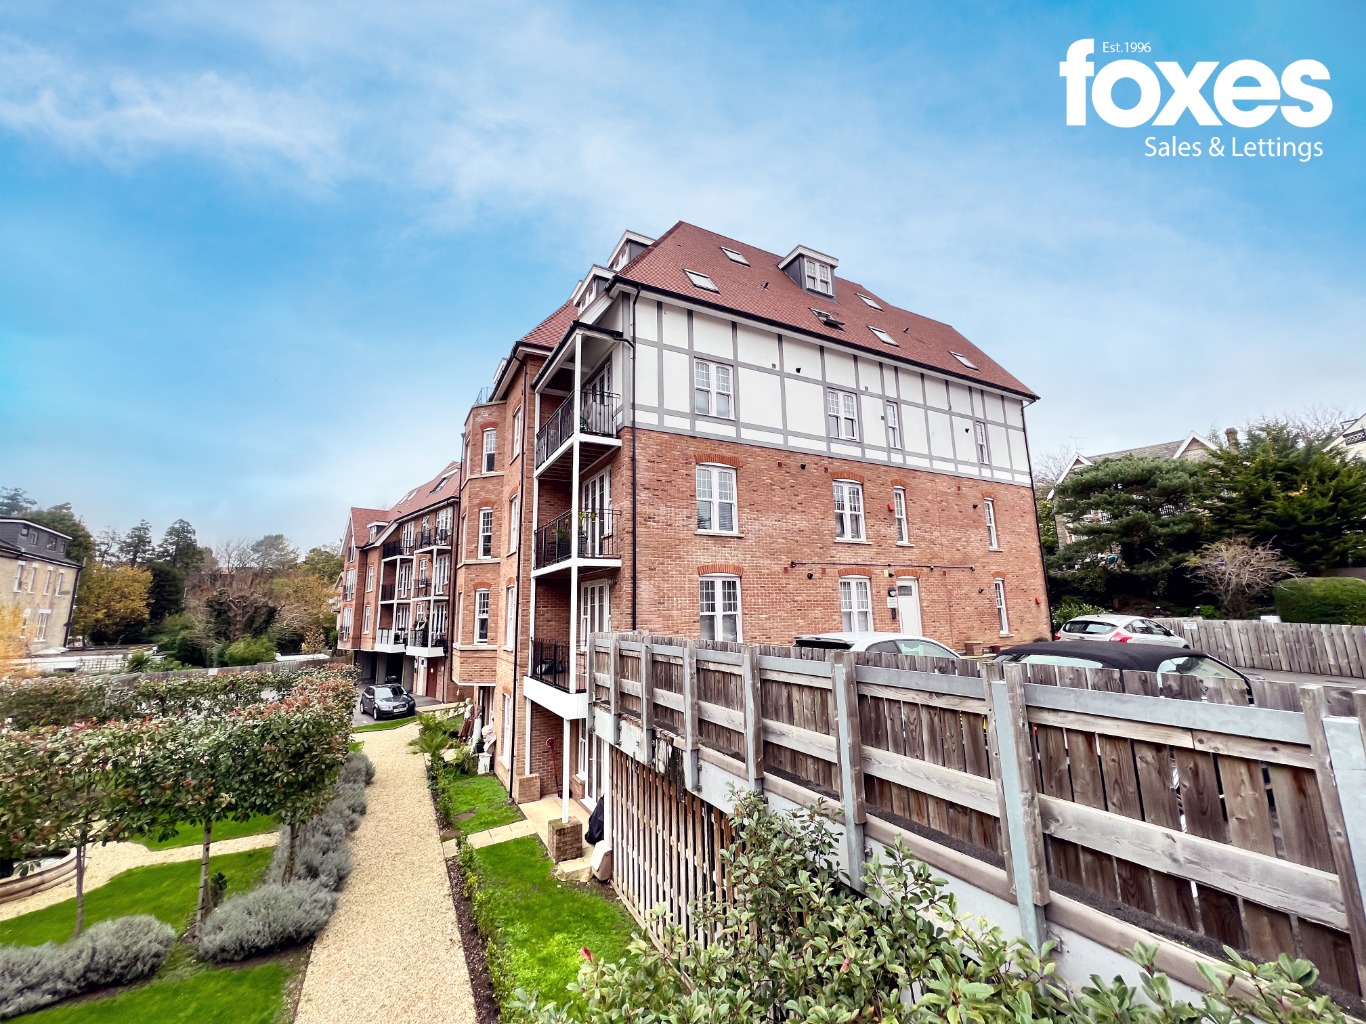 1 bed flat to rent in Knyveton Road, Dorset - Property Image 1